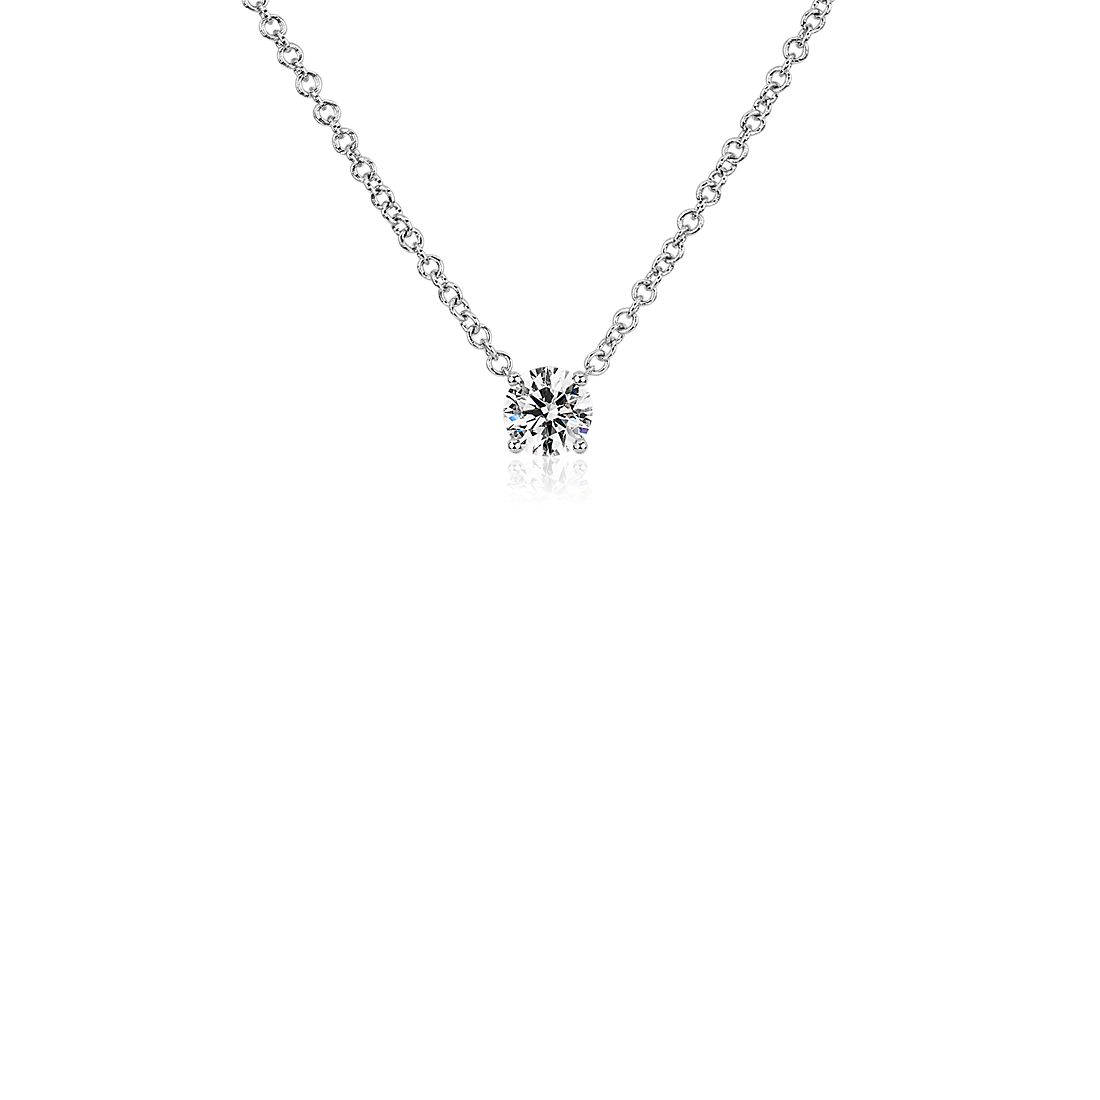 Lab Grown Diamond Floating Solitaire Pendant in 14k White Gold (0.23 ct. tw.)